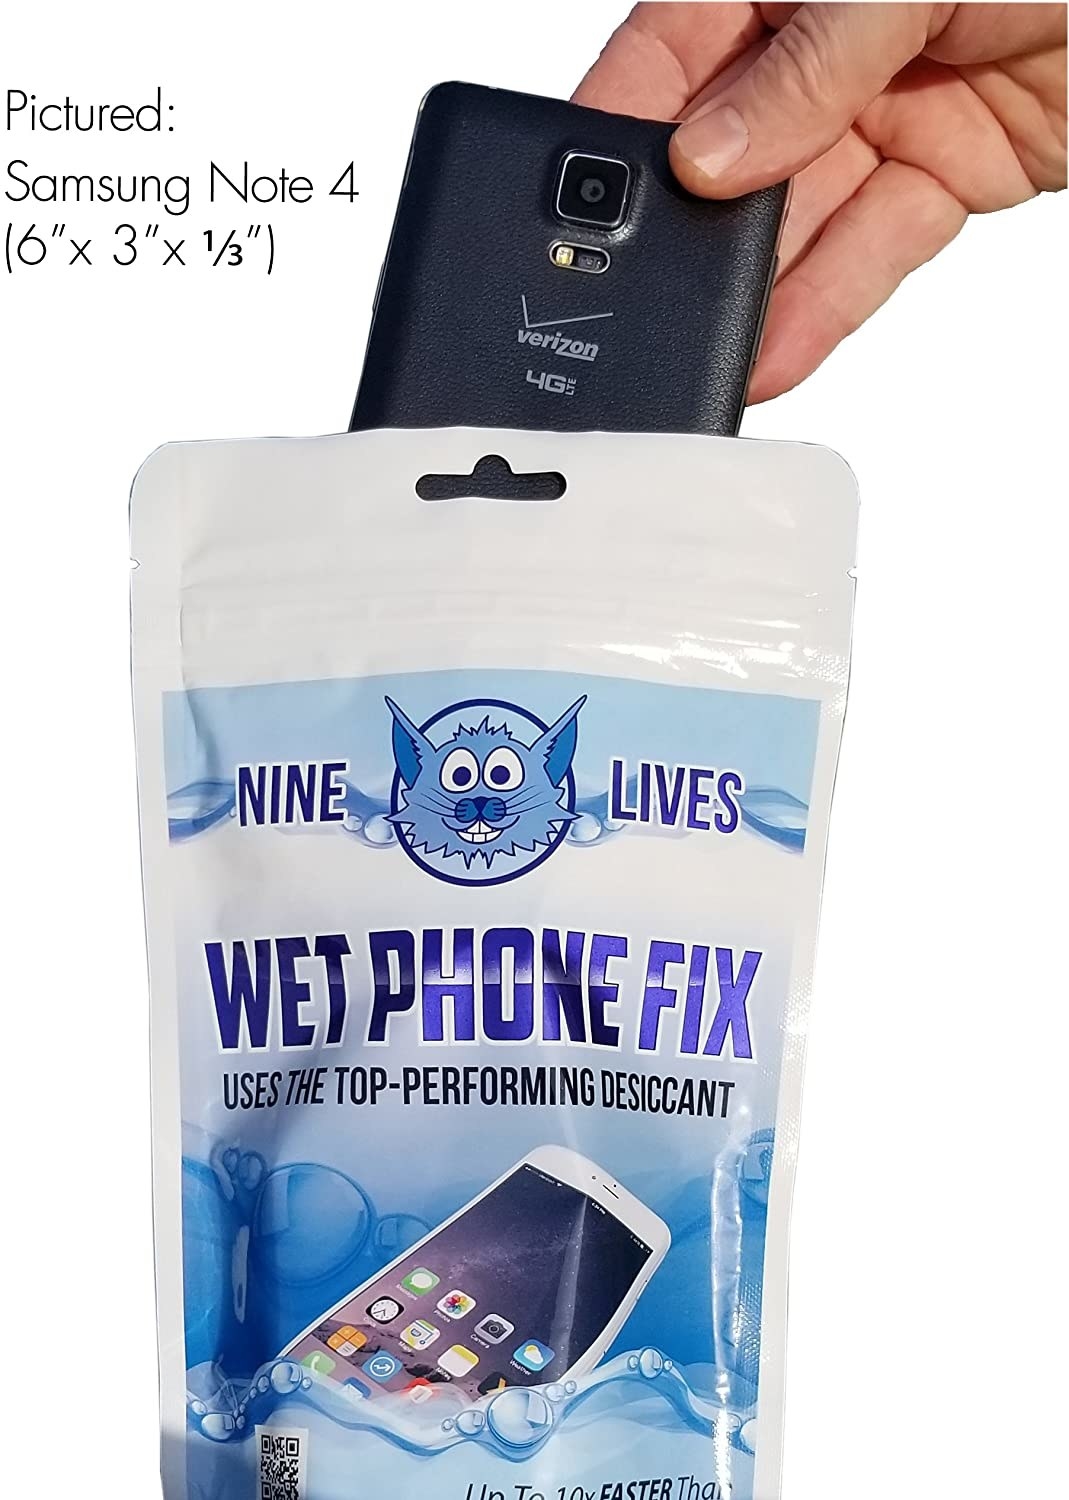 Model putting a samsung phone into a small white bag called &quot;wet phone fix&quot; 